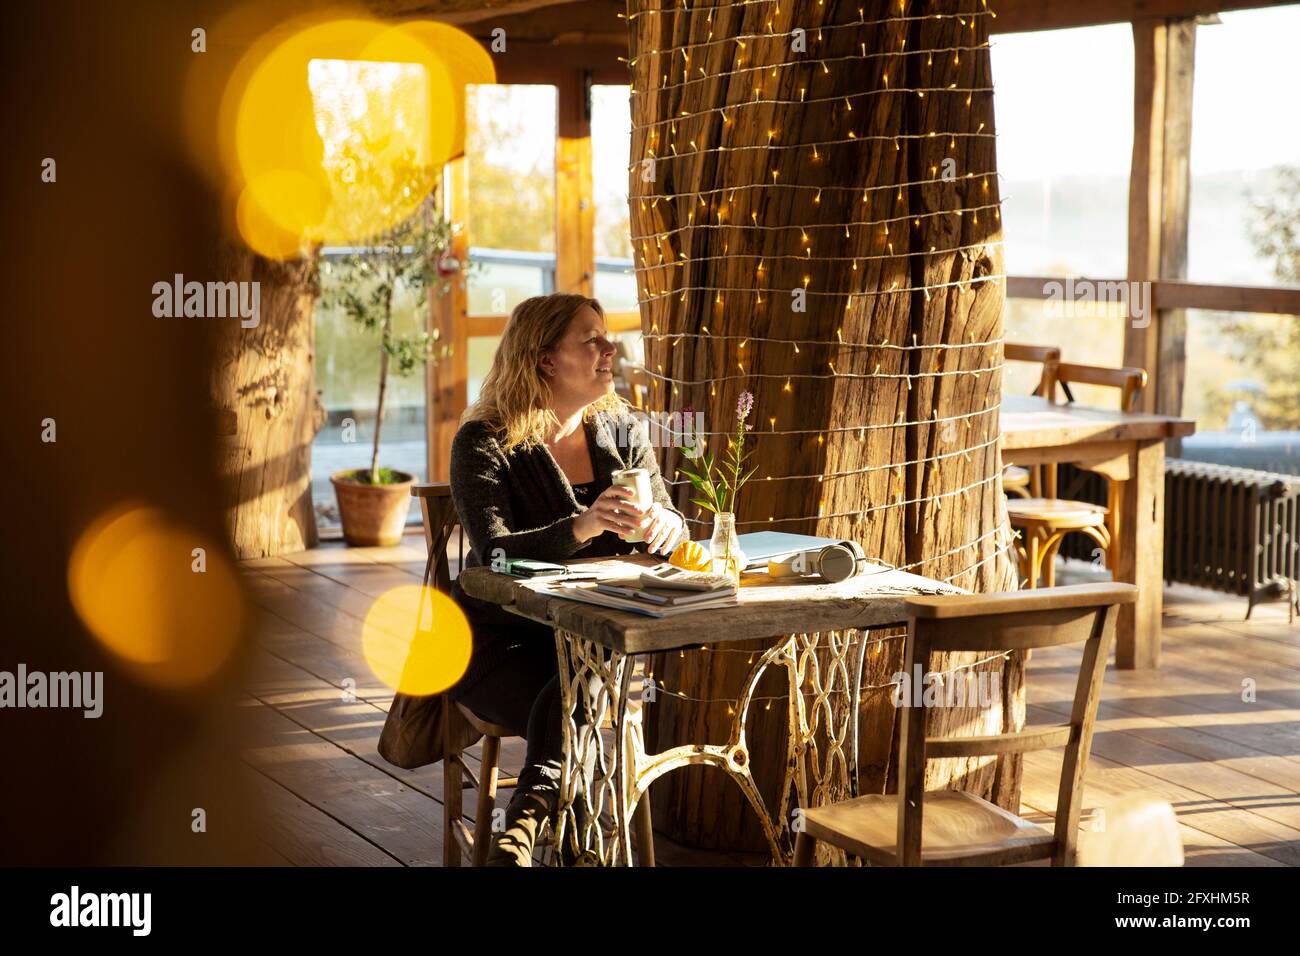 Female small business owner drinking coffee at sunny cafe table Stock Photo